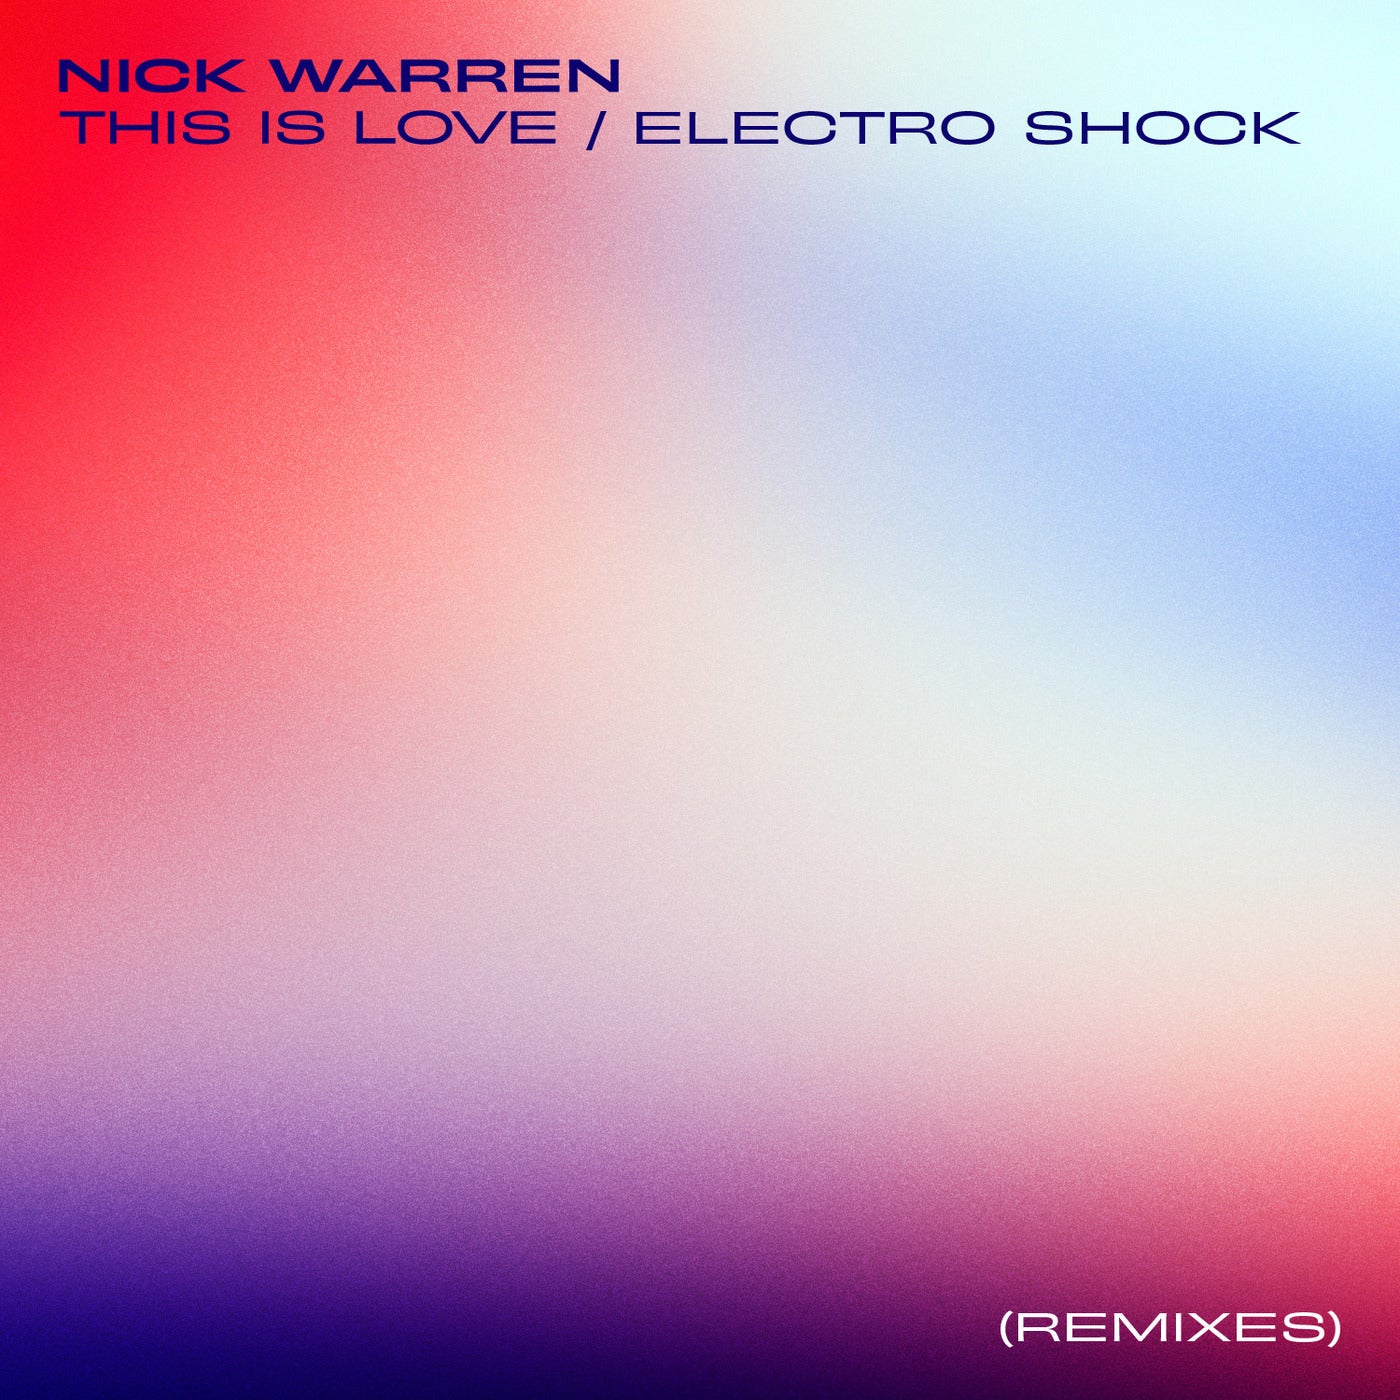 Download Nick Warren - This is Love / Electro Shock (Remixes) on Electrobuzz